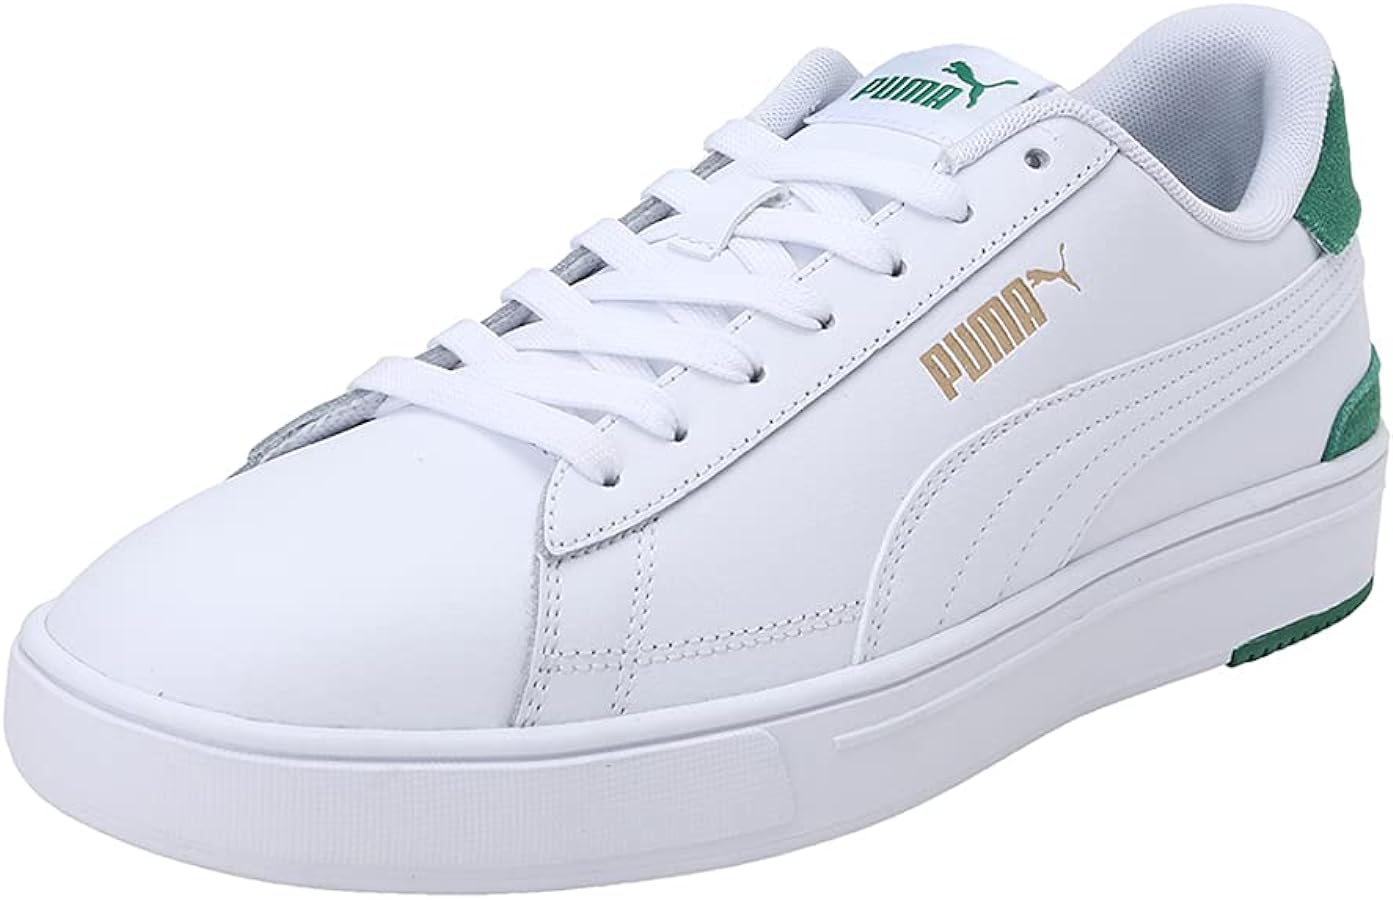 Puma White Sneakers for Men: The Epitome of Style and Comfort